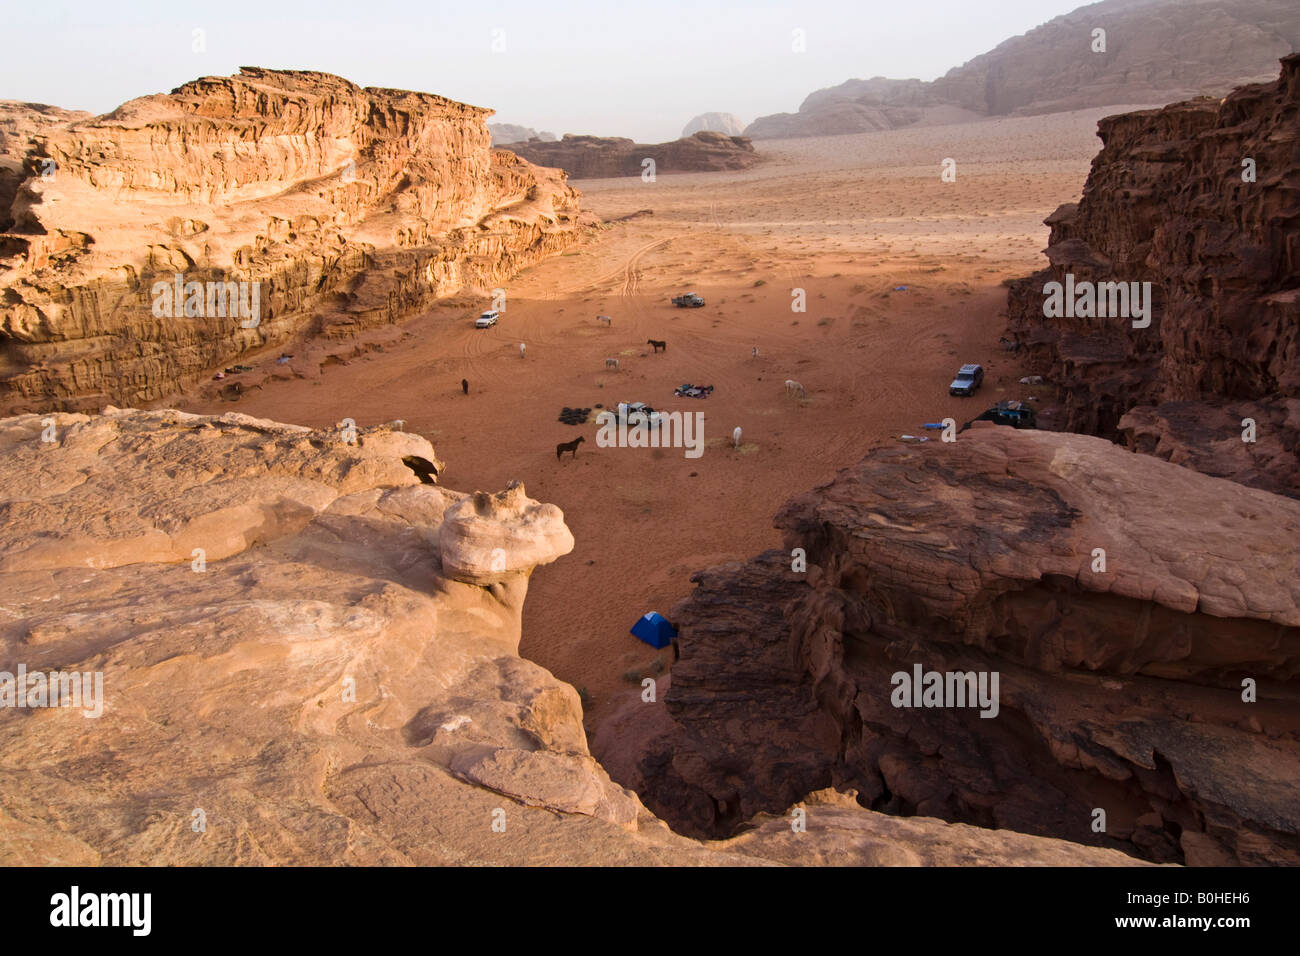 Camp with horses in the desert, Wadi Rum, Jordan, Middle East Stock Photo